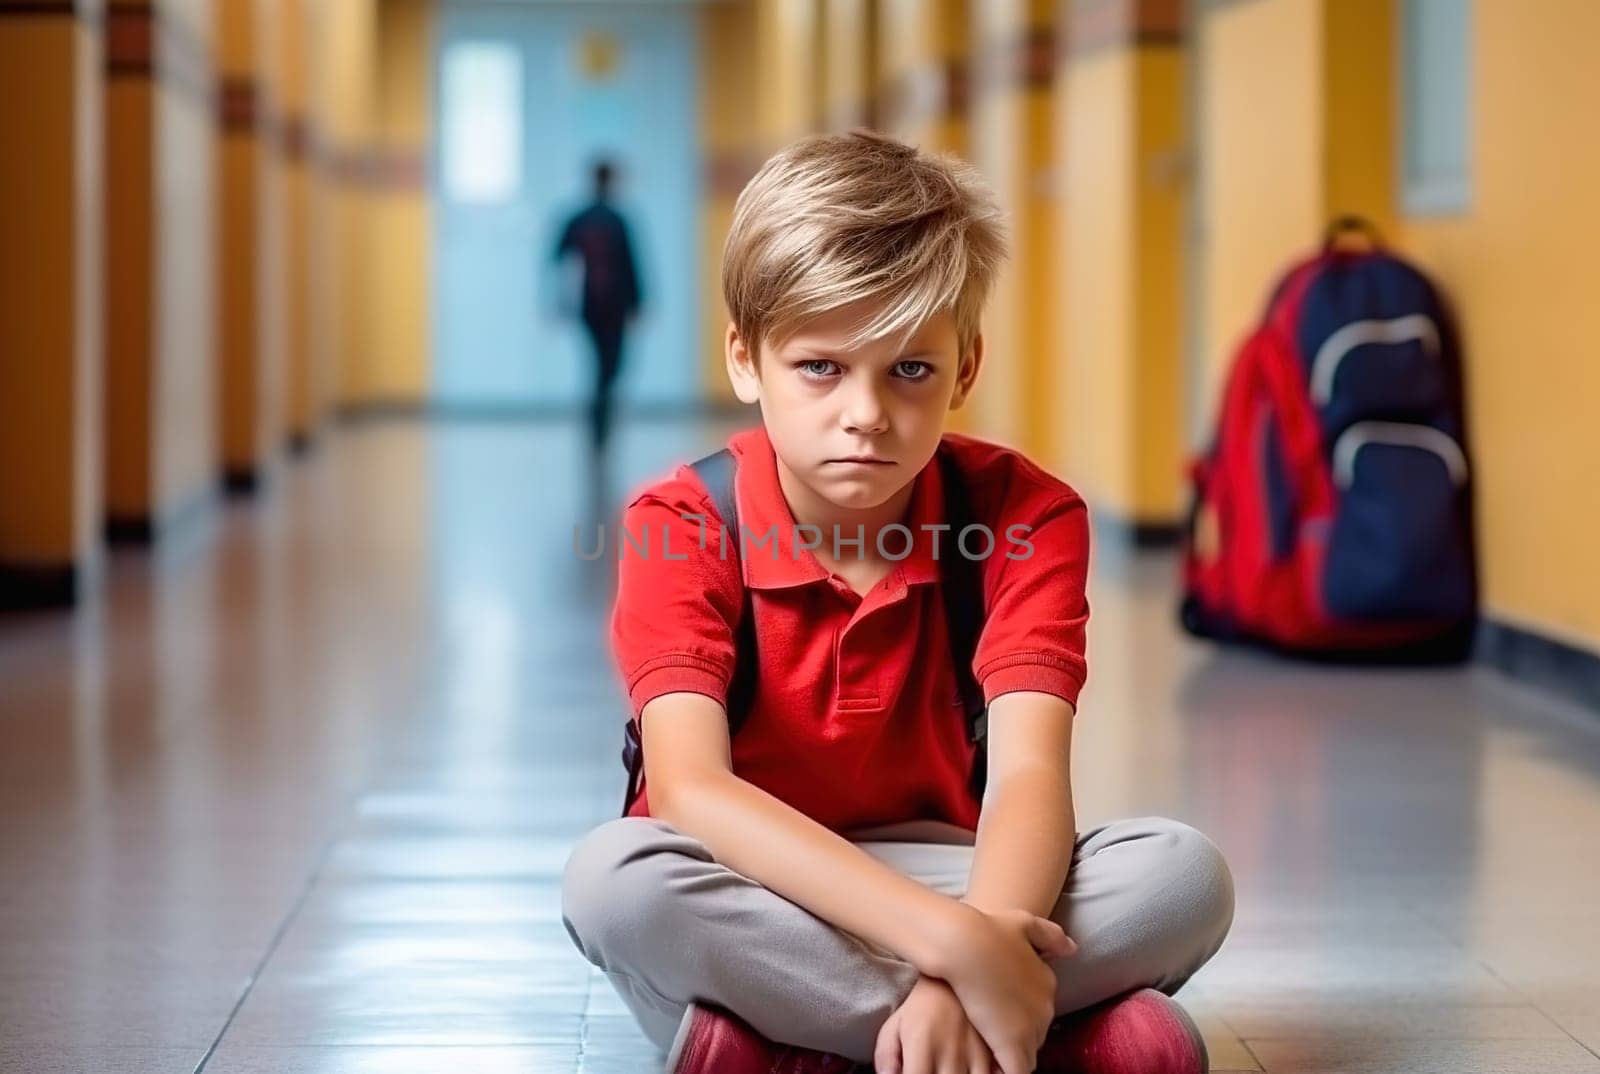 Portrait of an offended student in a school hallway. Bullying concept at school. High quality photo